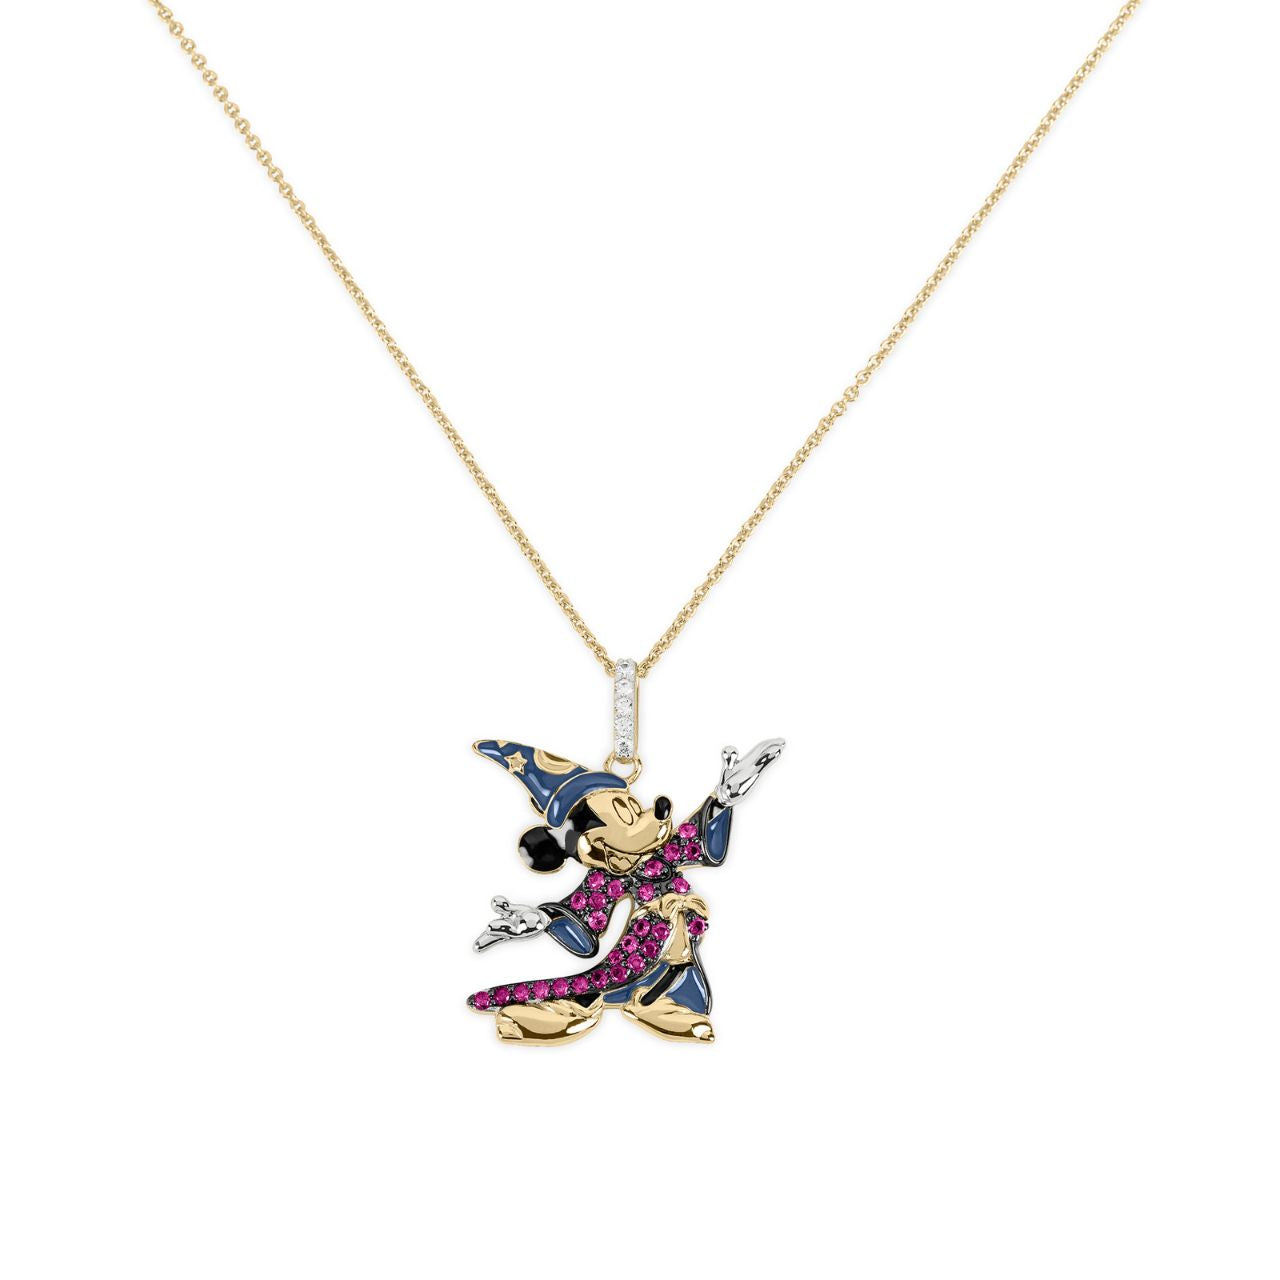 Disney Wizard Mickey Mouse Stone Set Necklace  This Disney Wizard Mickey Mouse Stone Set Necklace is the perfect accessory for any Disney fan. Crafted with high-quality stones, this necklace adds a touch of magic to any outfit. Show your love for the iconic wizard with this unique and stylish piece.